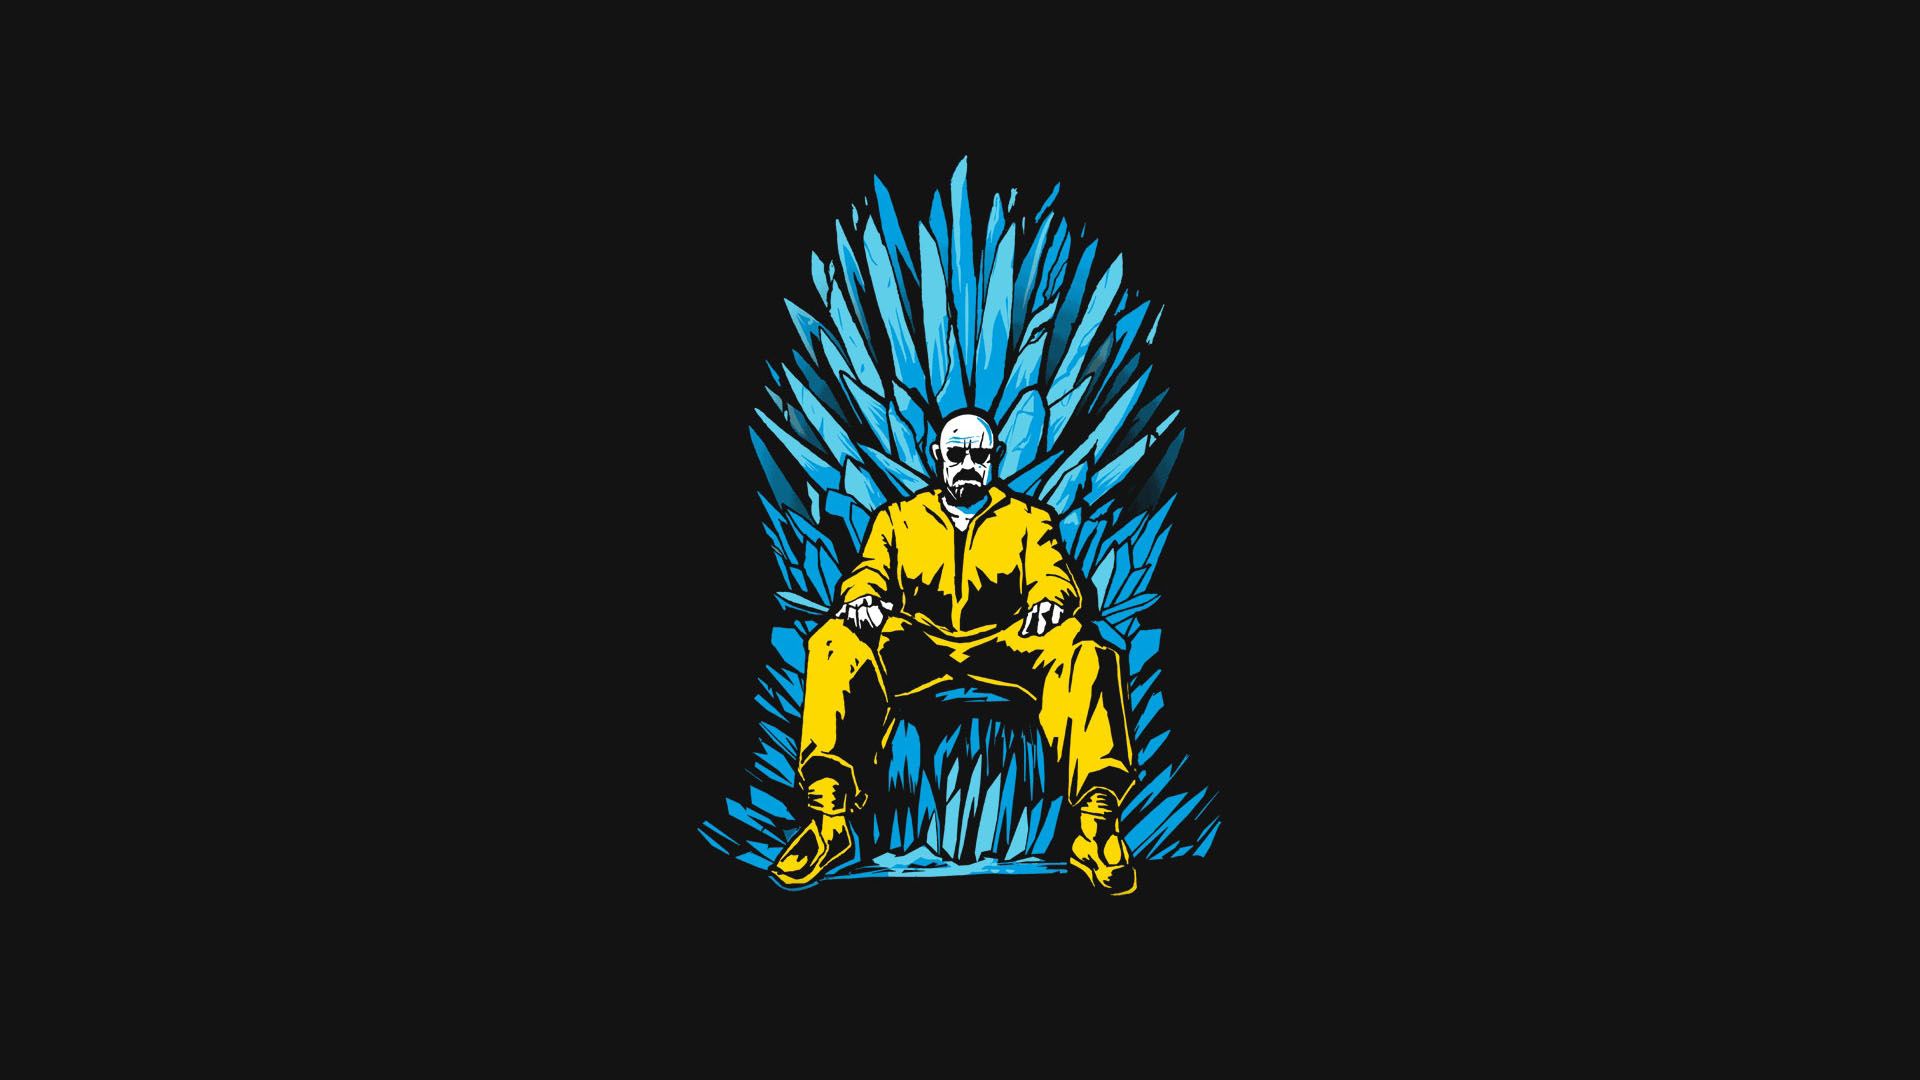 Breaking Bad Game Of Thrones Crossover HD Wallpaperx1080